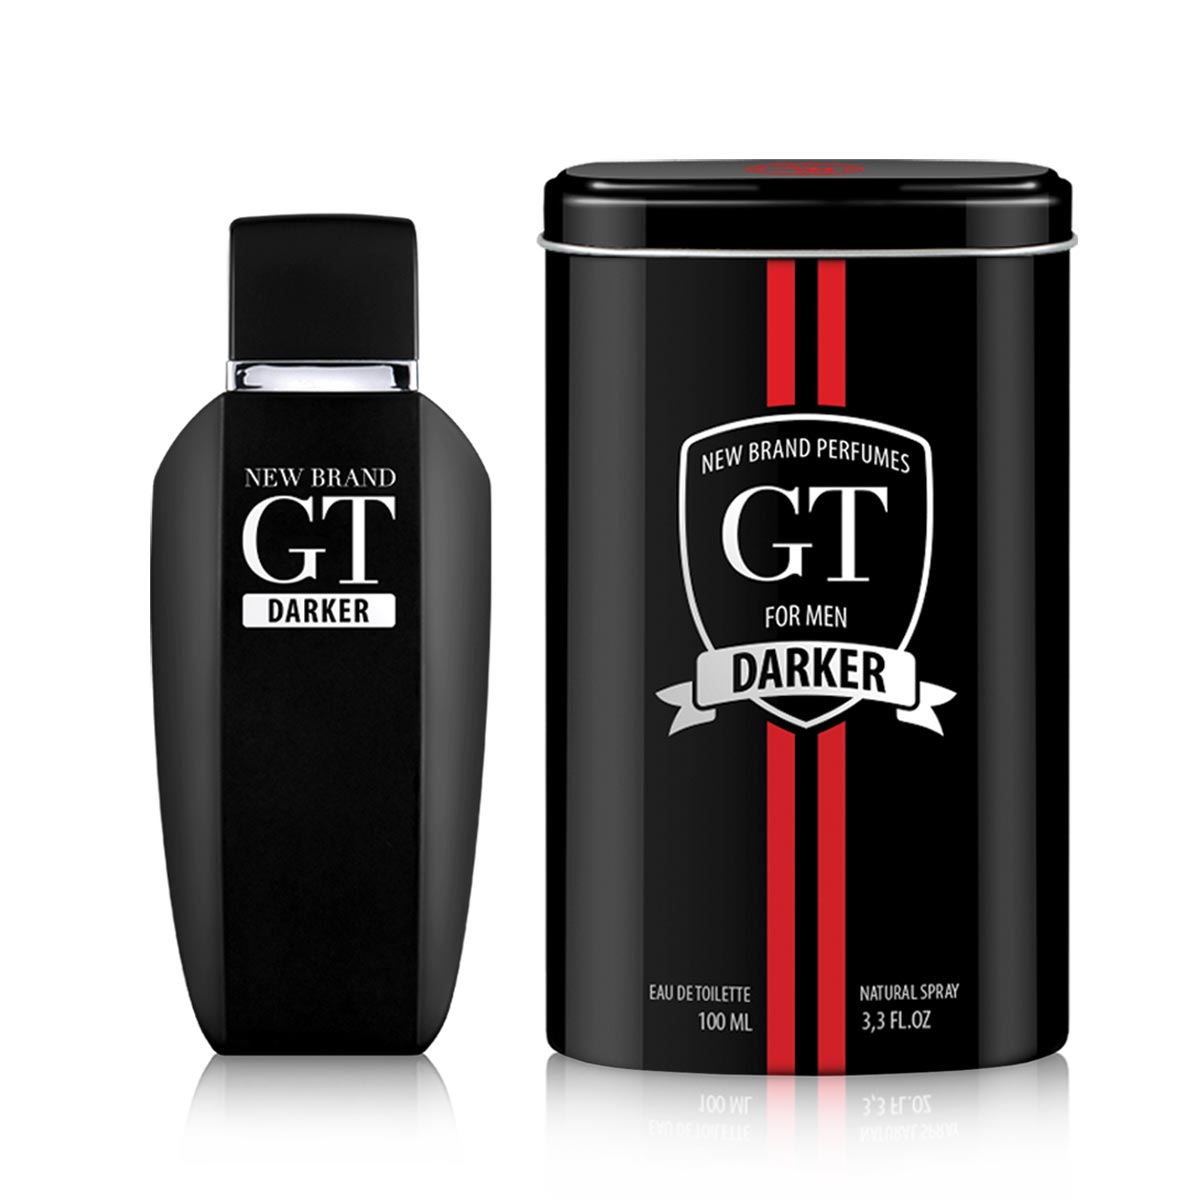 GT Collection The CEO | Pure Perfume for Men - 100 ml